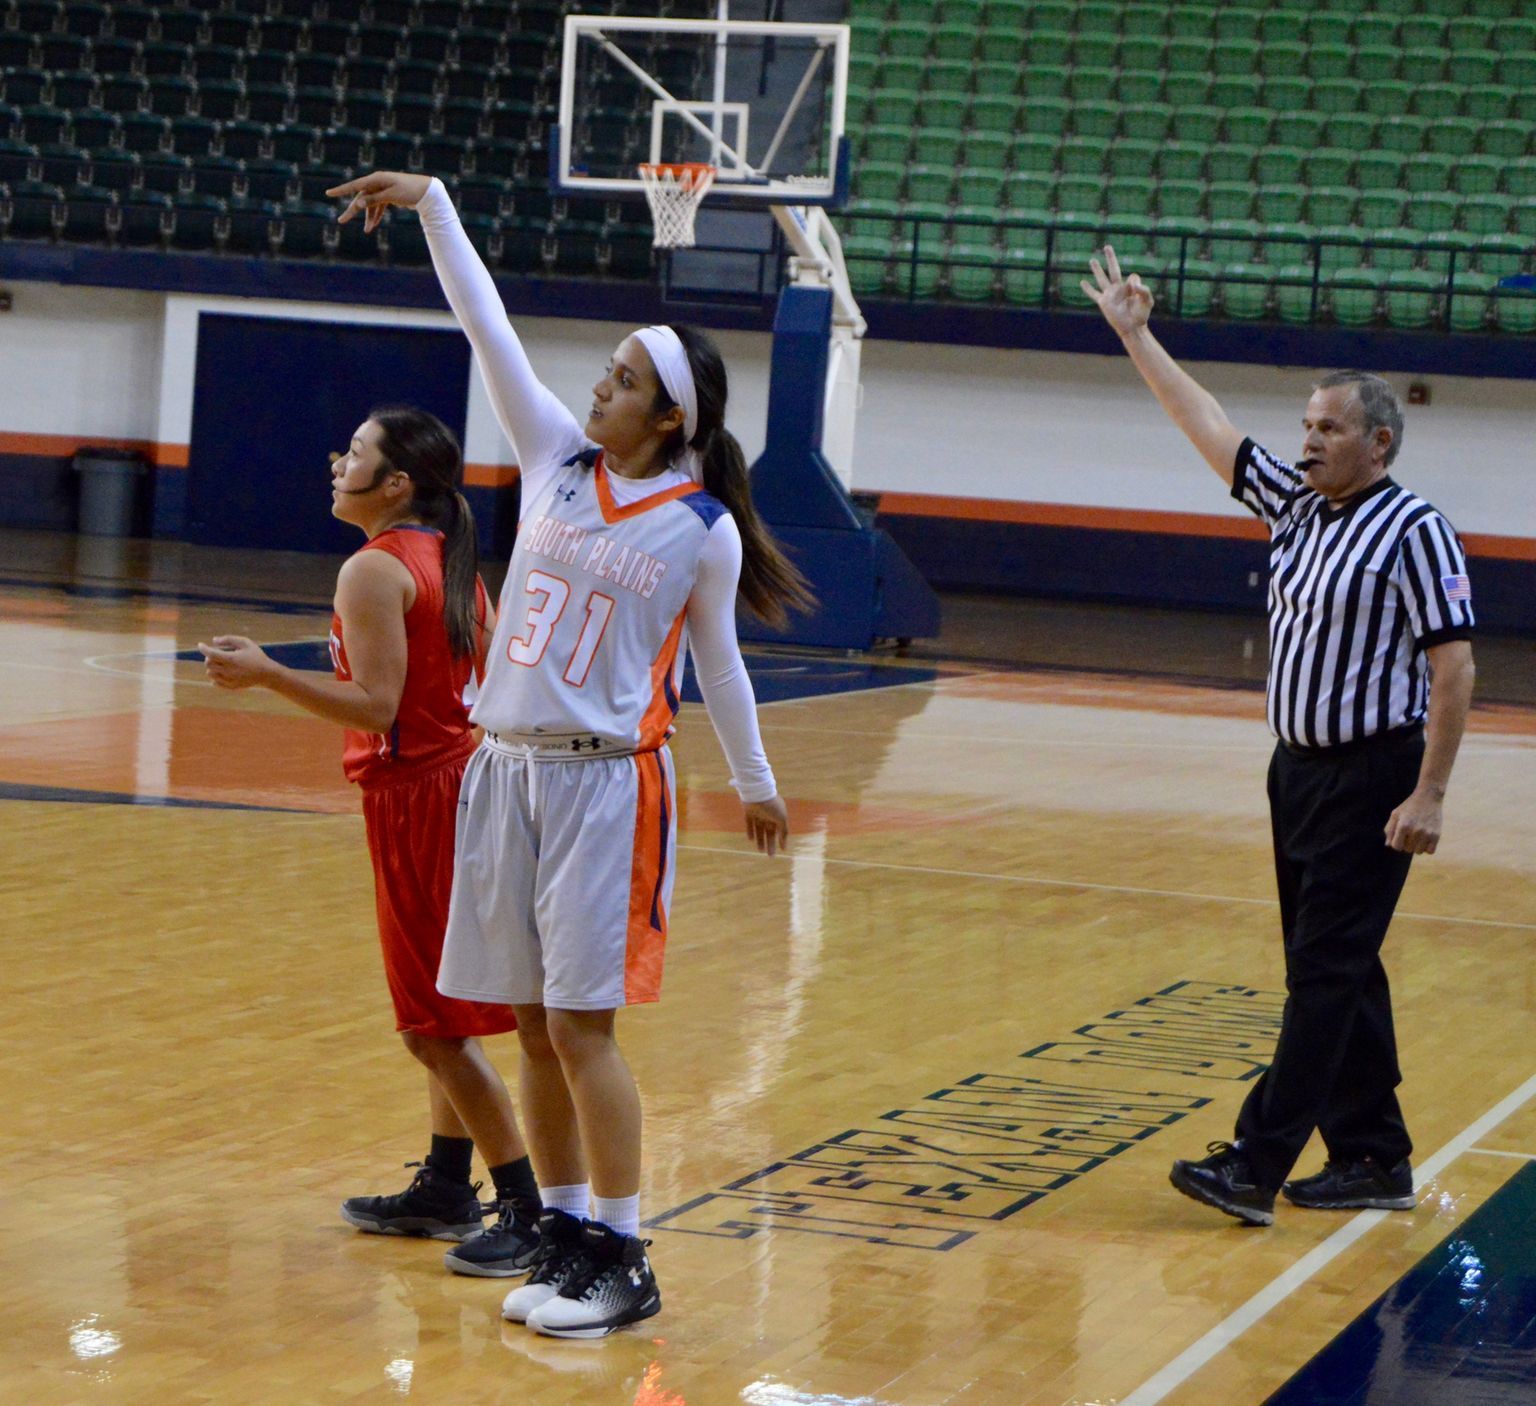 Cera breaks Swoopes' school record with 49 points on Thursday night